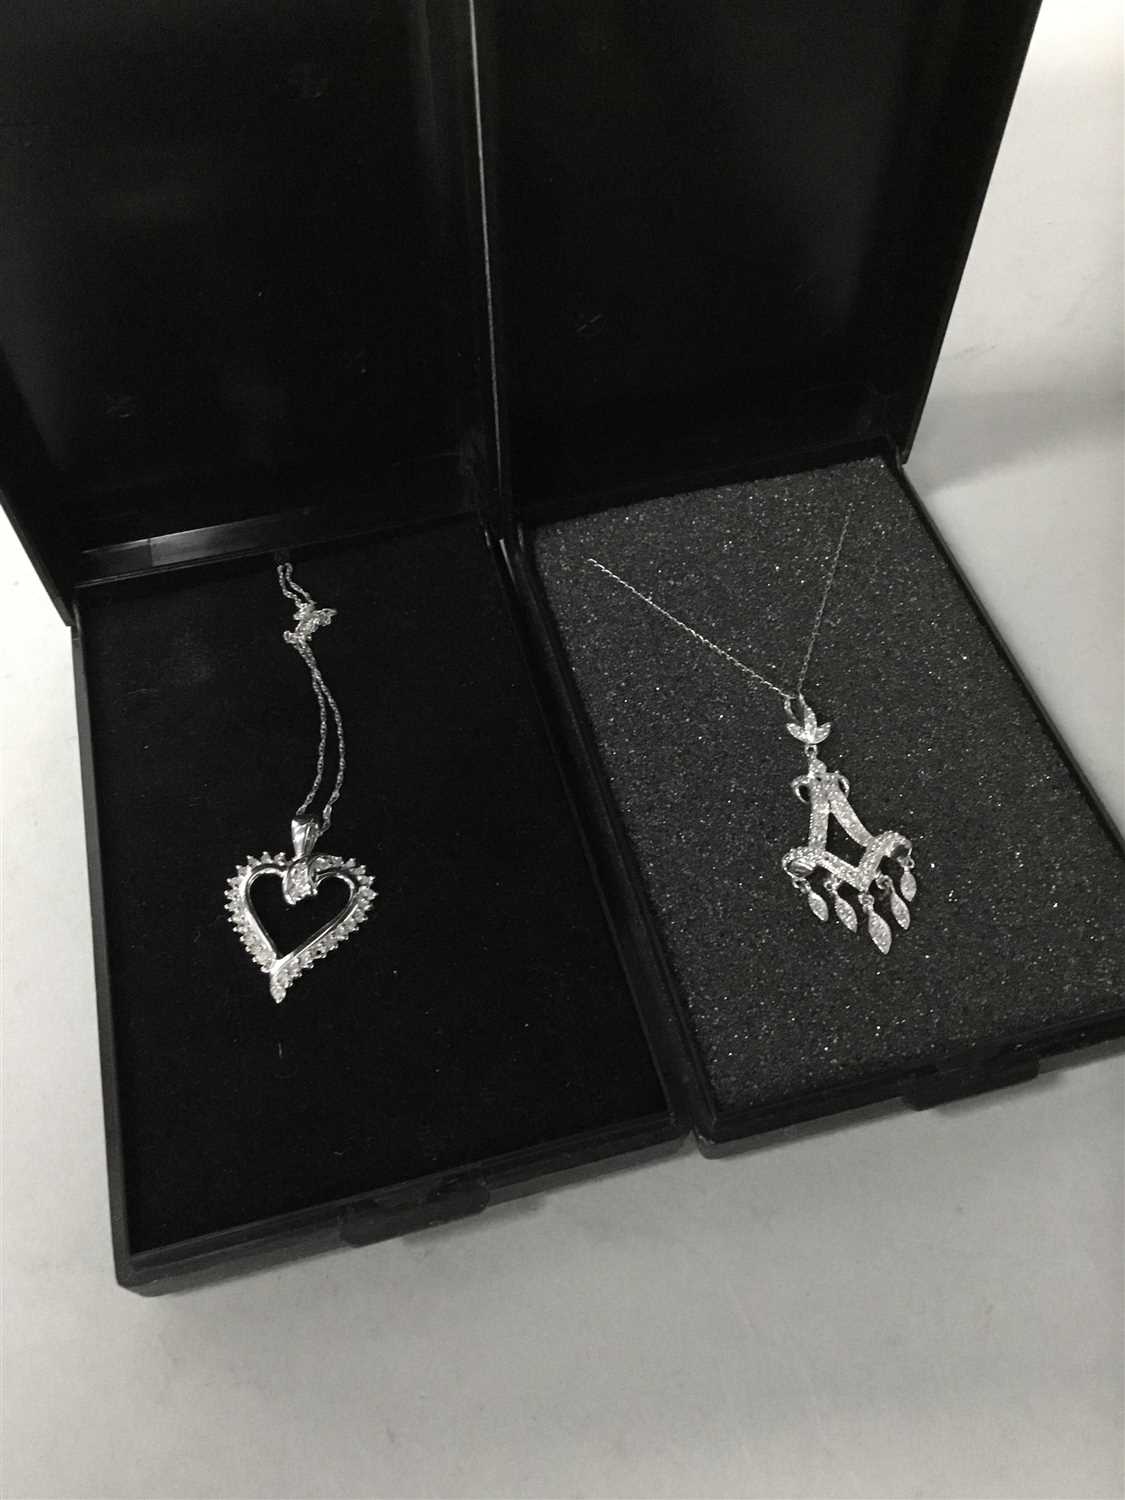 Lot 4 - A DIAMOND HEART PENDANT AND ANOTHER PENDANT